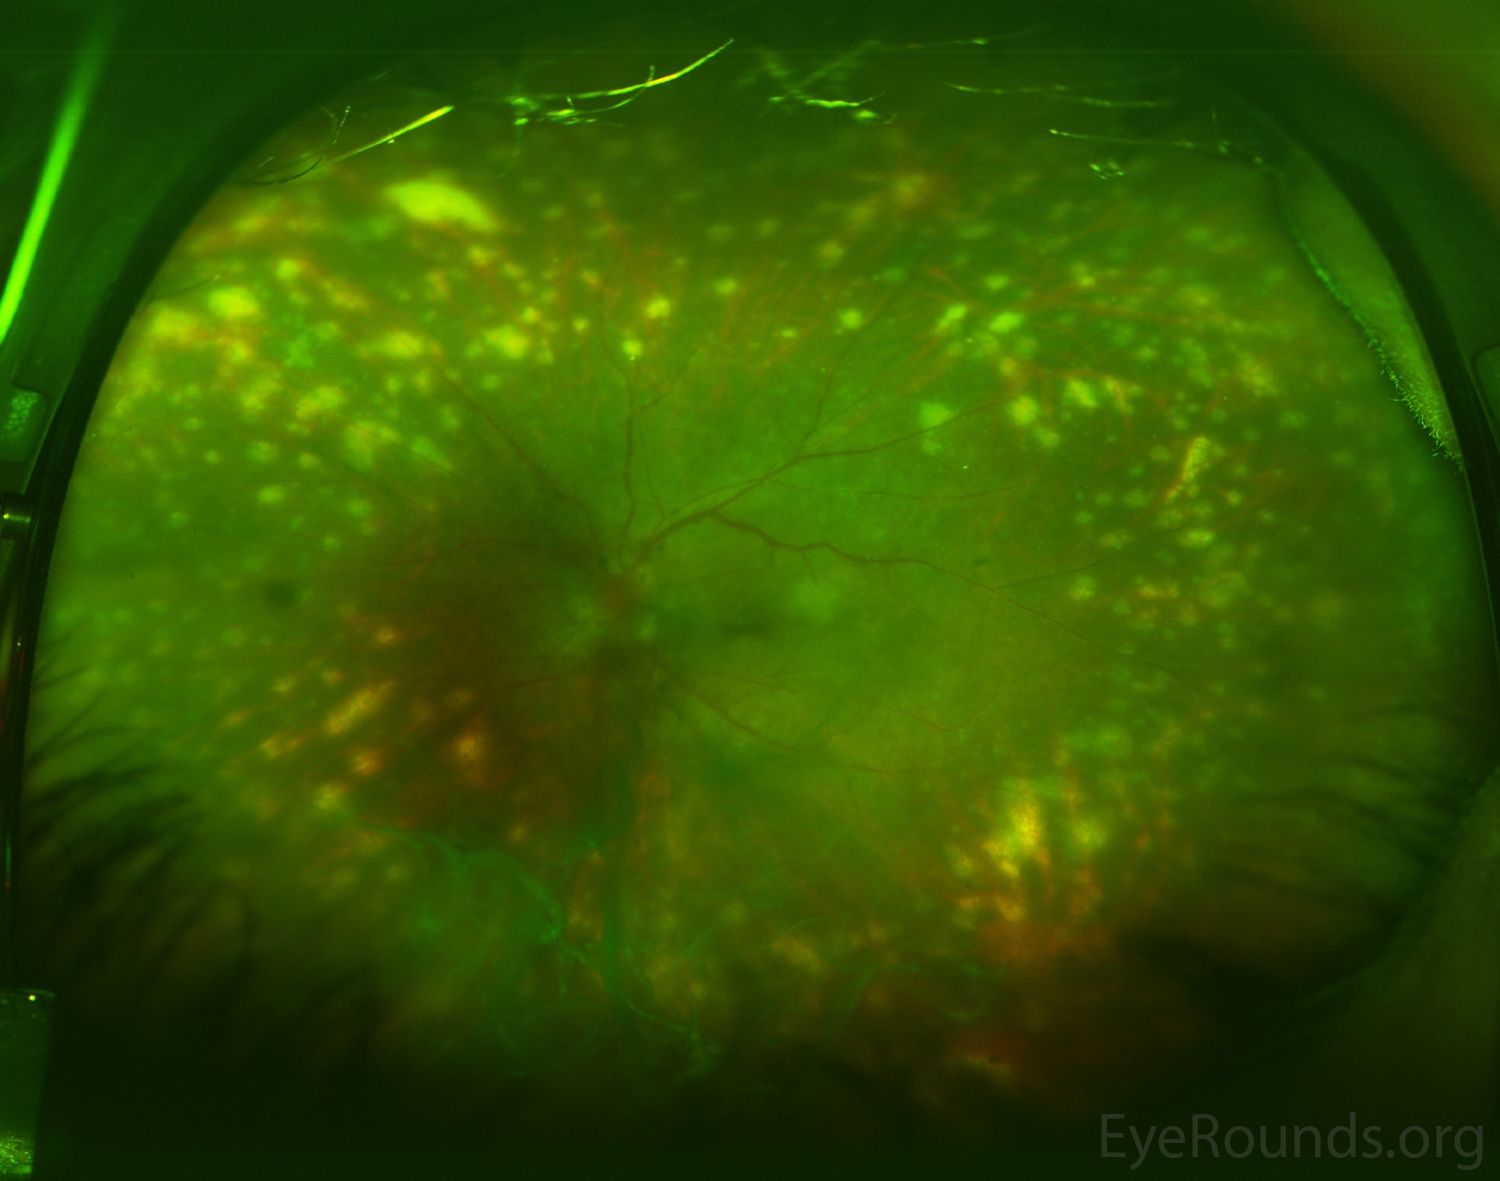  Optos ultra-widefield pseudocolor fundus photography